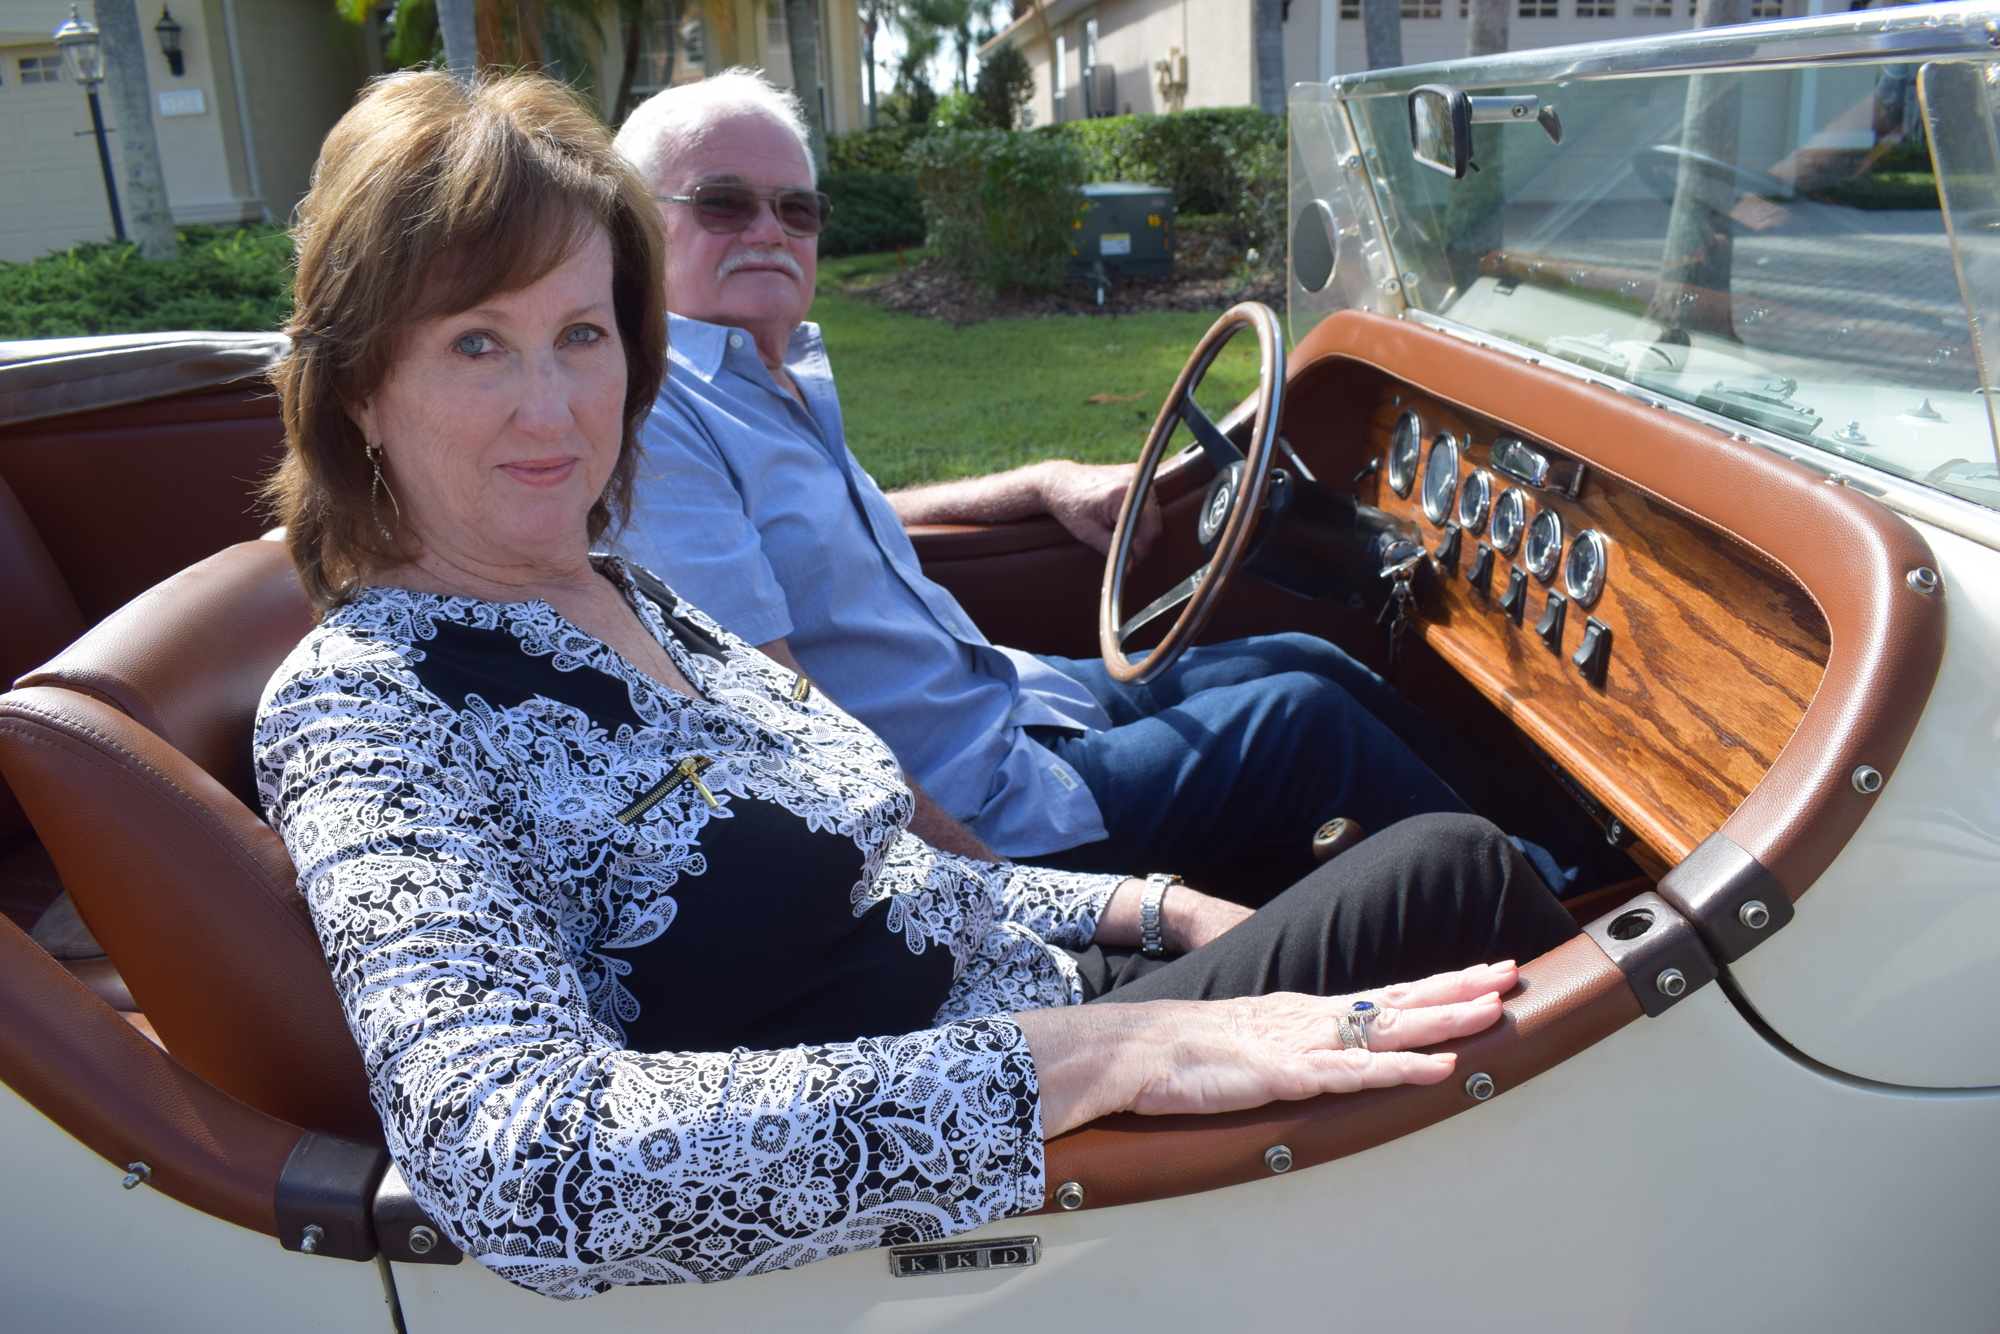 Lakewood Ranch car show features an Excalibur packed with family